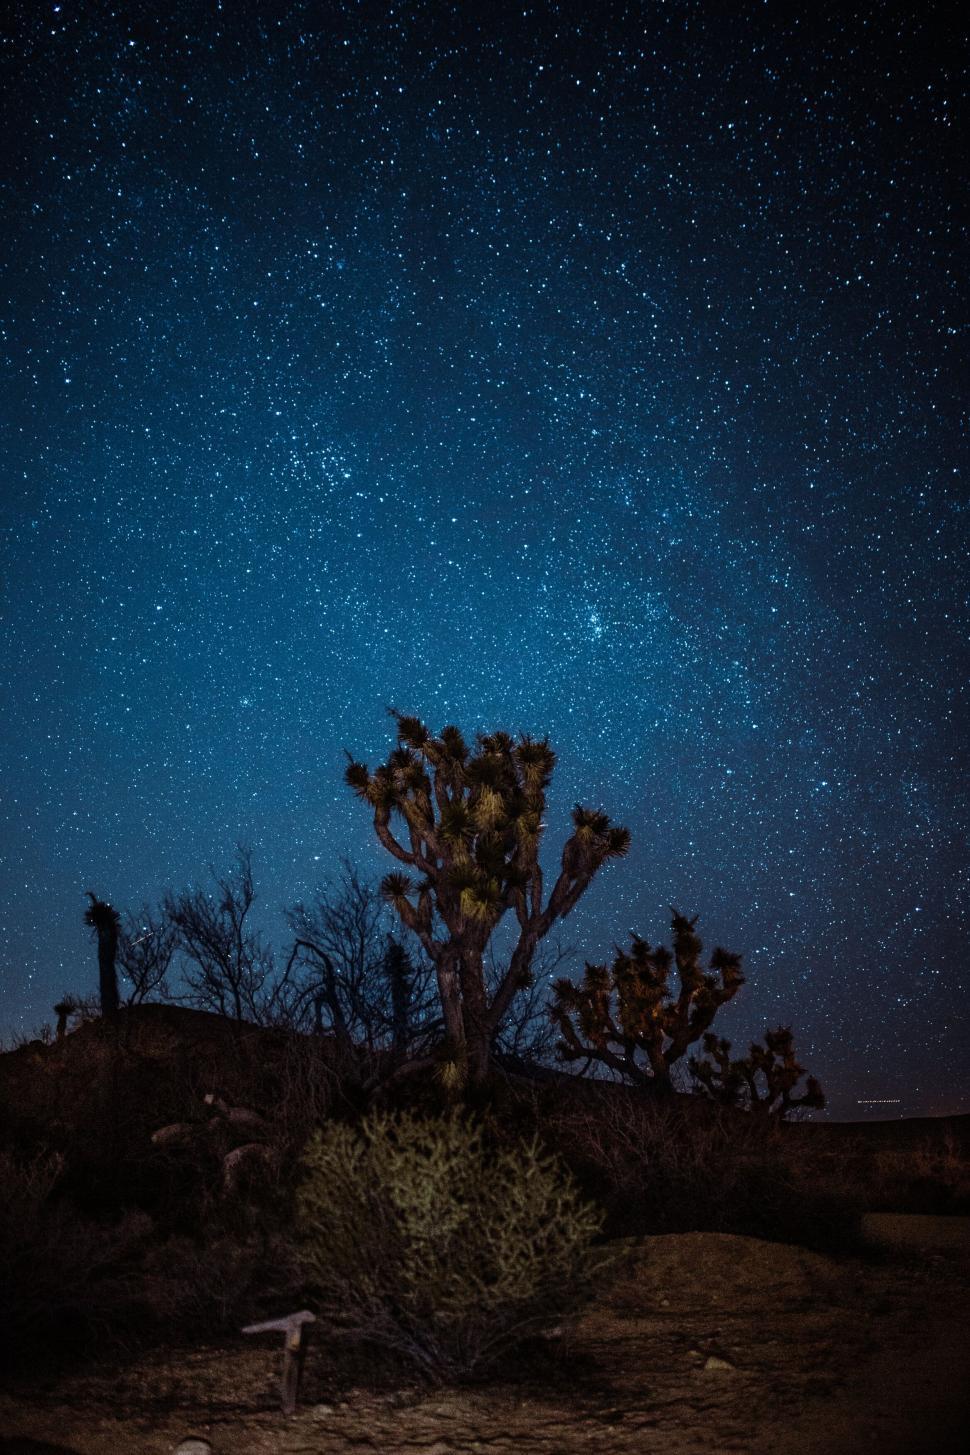 Free Image of Starry sky above a desert with a Joshua tree 